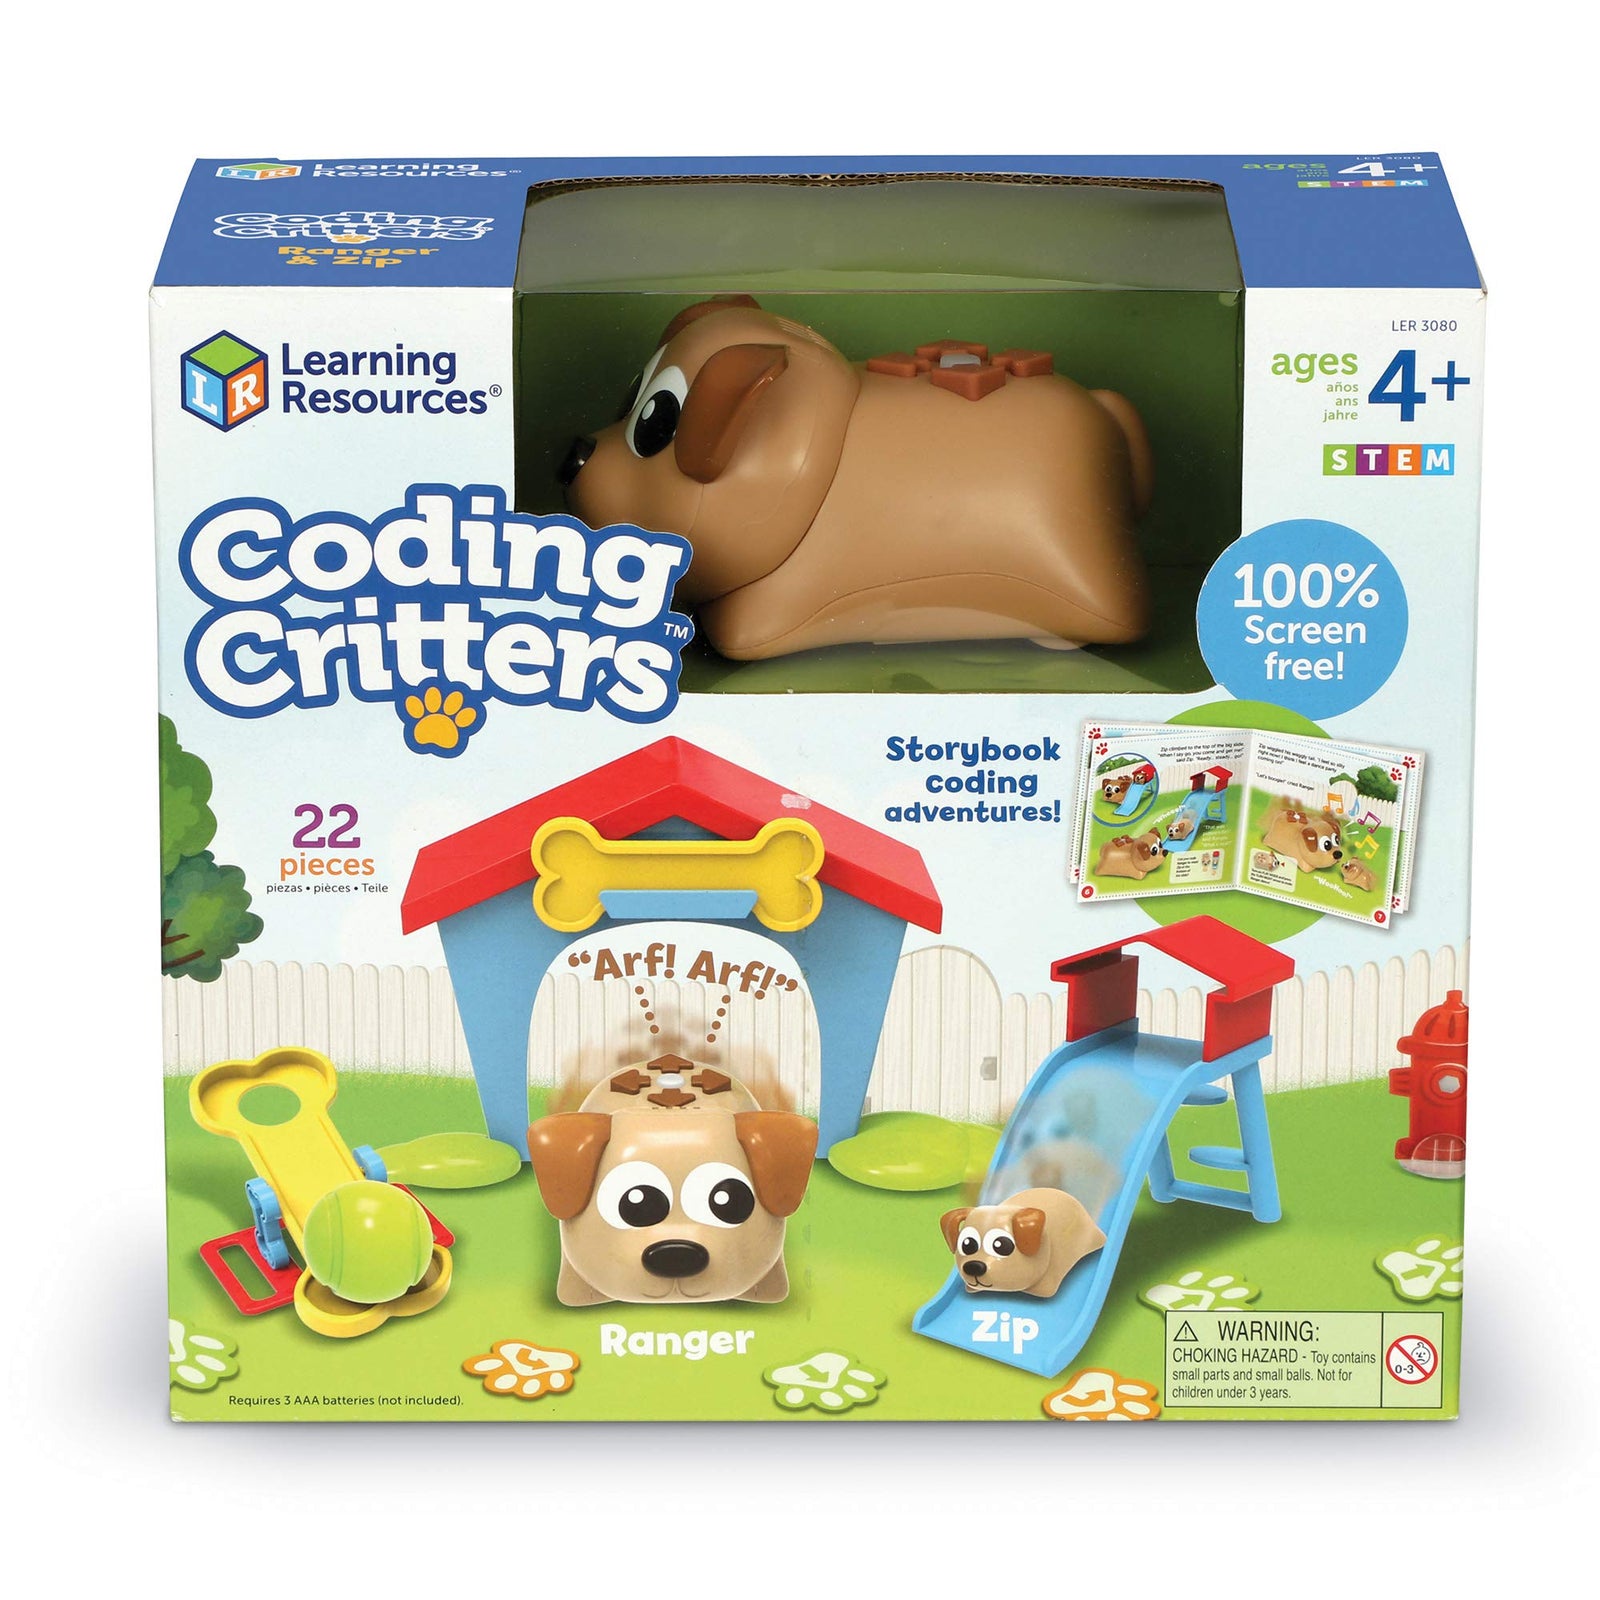 Learning Resources Coding Critters Ranger & Zip, Screen-Free Early Coding Toy For Kids, Interactive STEM Coding Pet, 22 Piece Set, Ages 4+